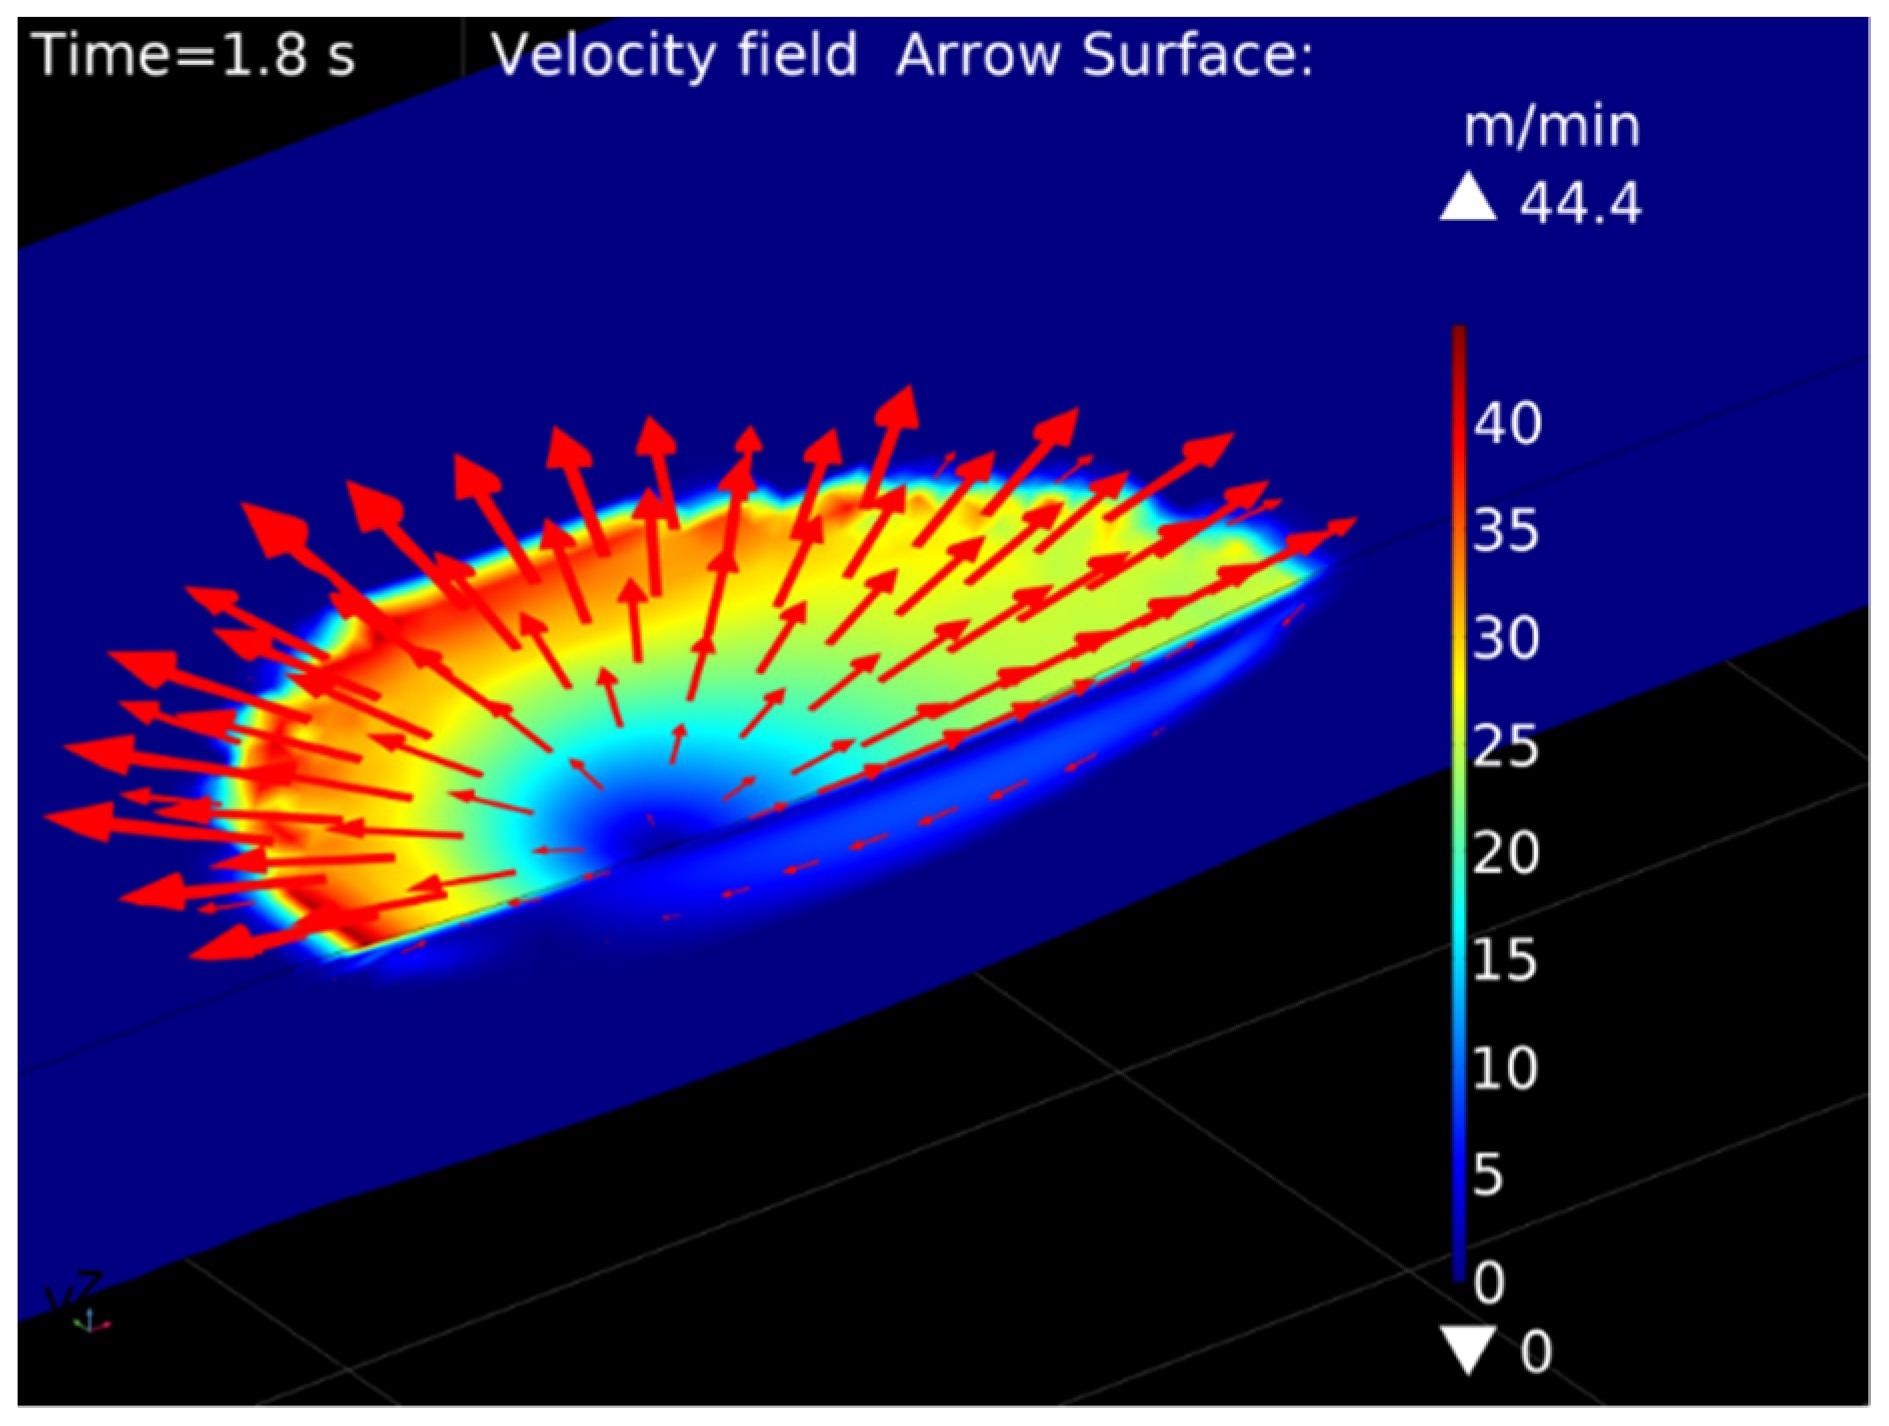 Velocity field of melt pool motion, computed by the fluid flow model for P = 1000 W, v = 400 mm/min, T = 20 °C.